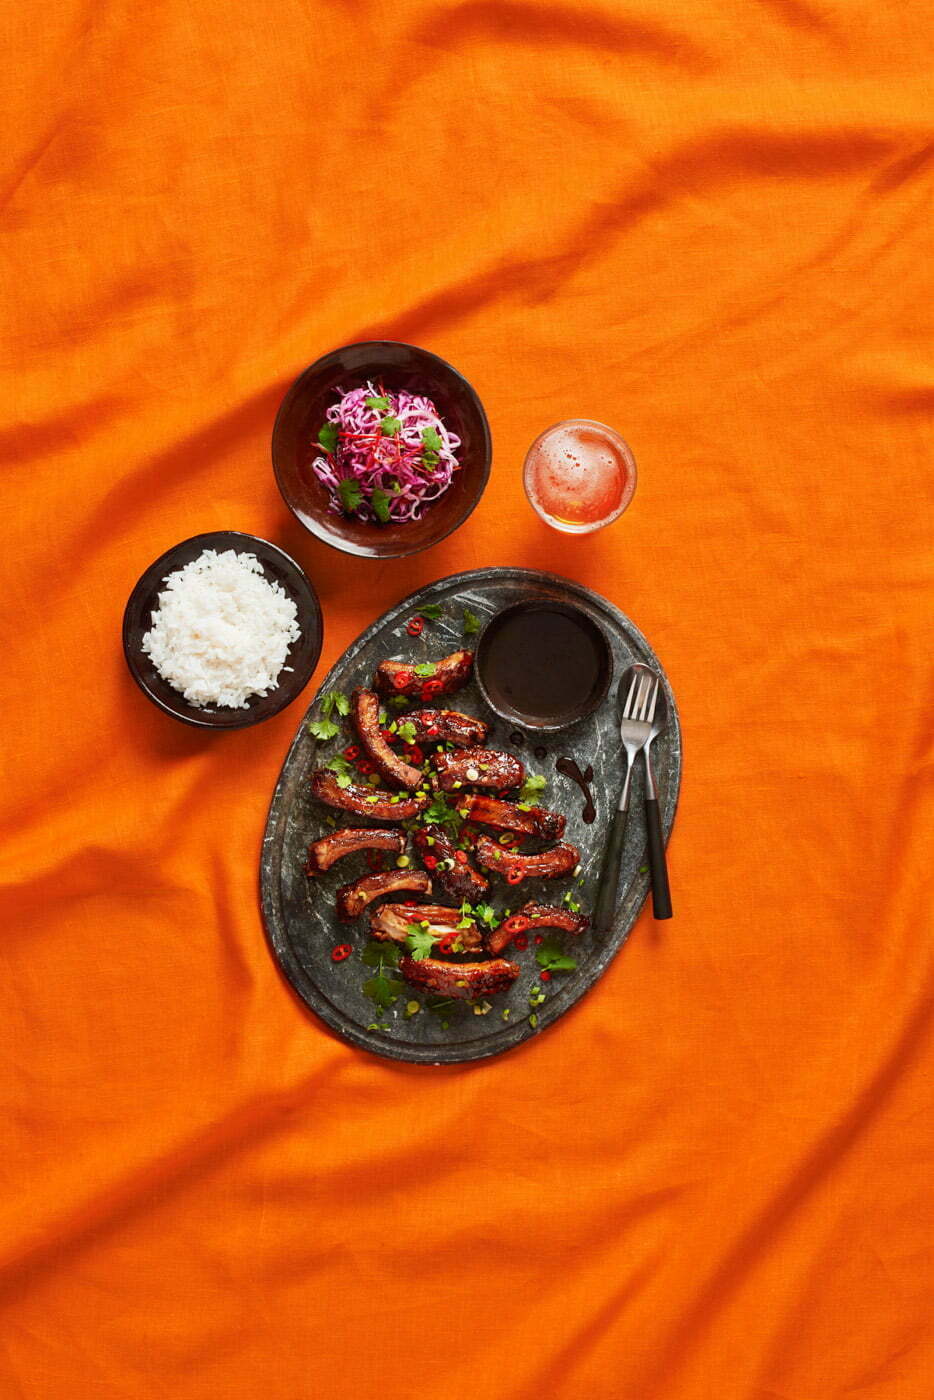 Ribs_serving_on_a_orange_tablecloth_by_Elina_Himanen